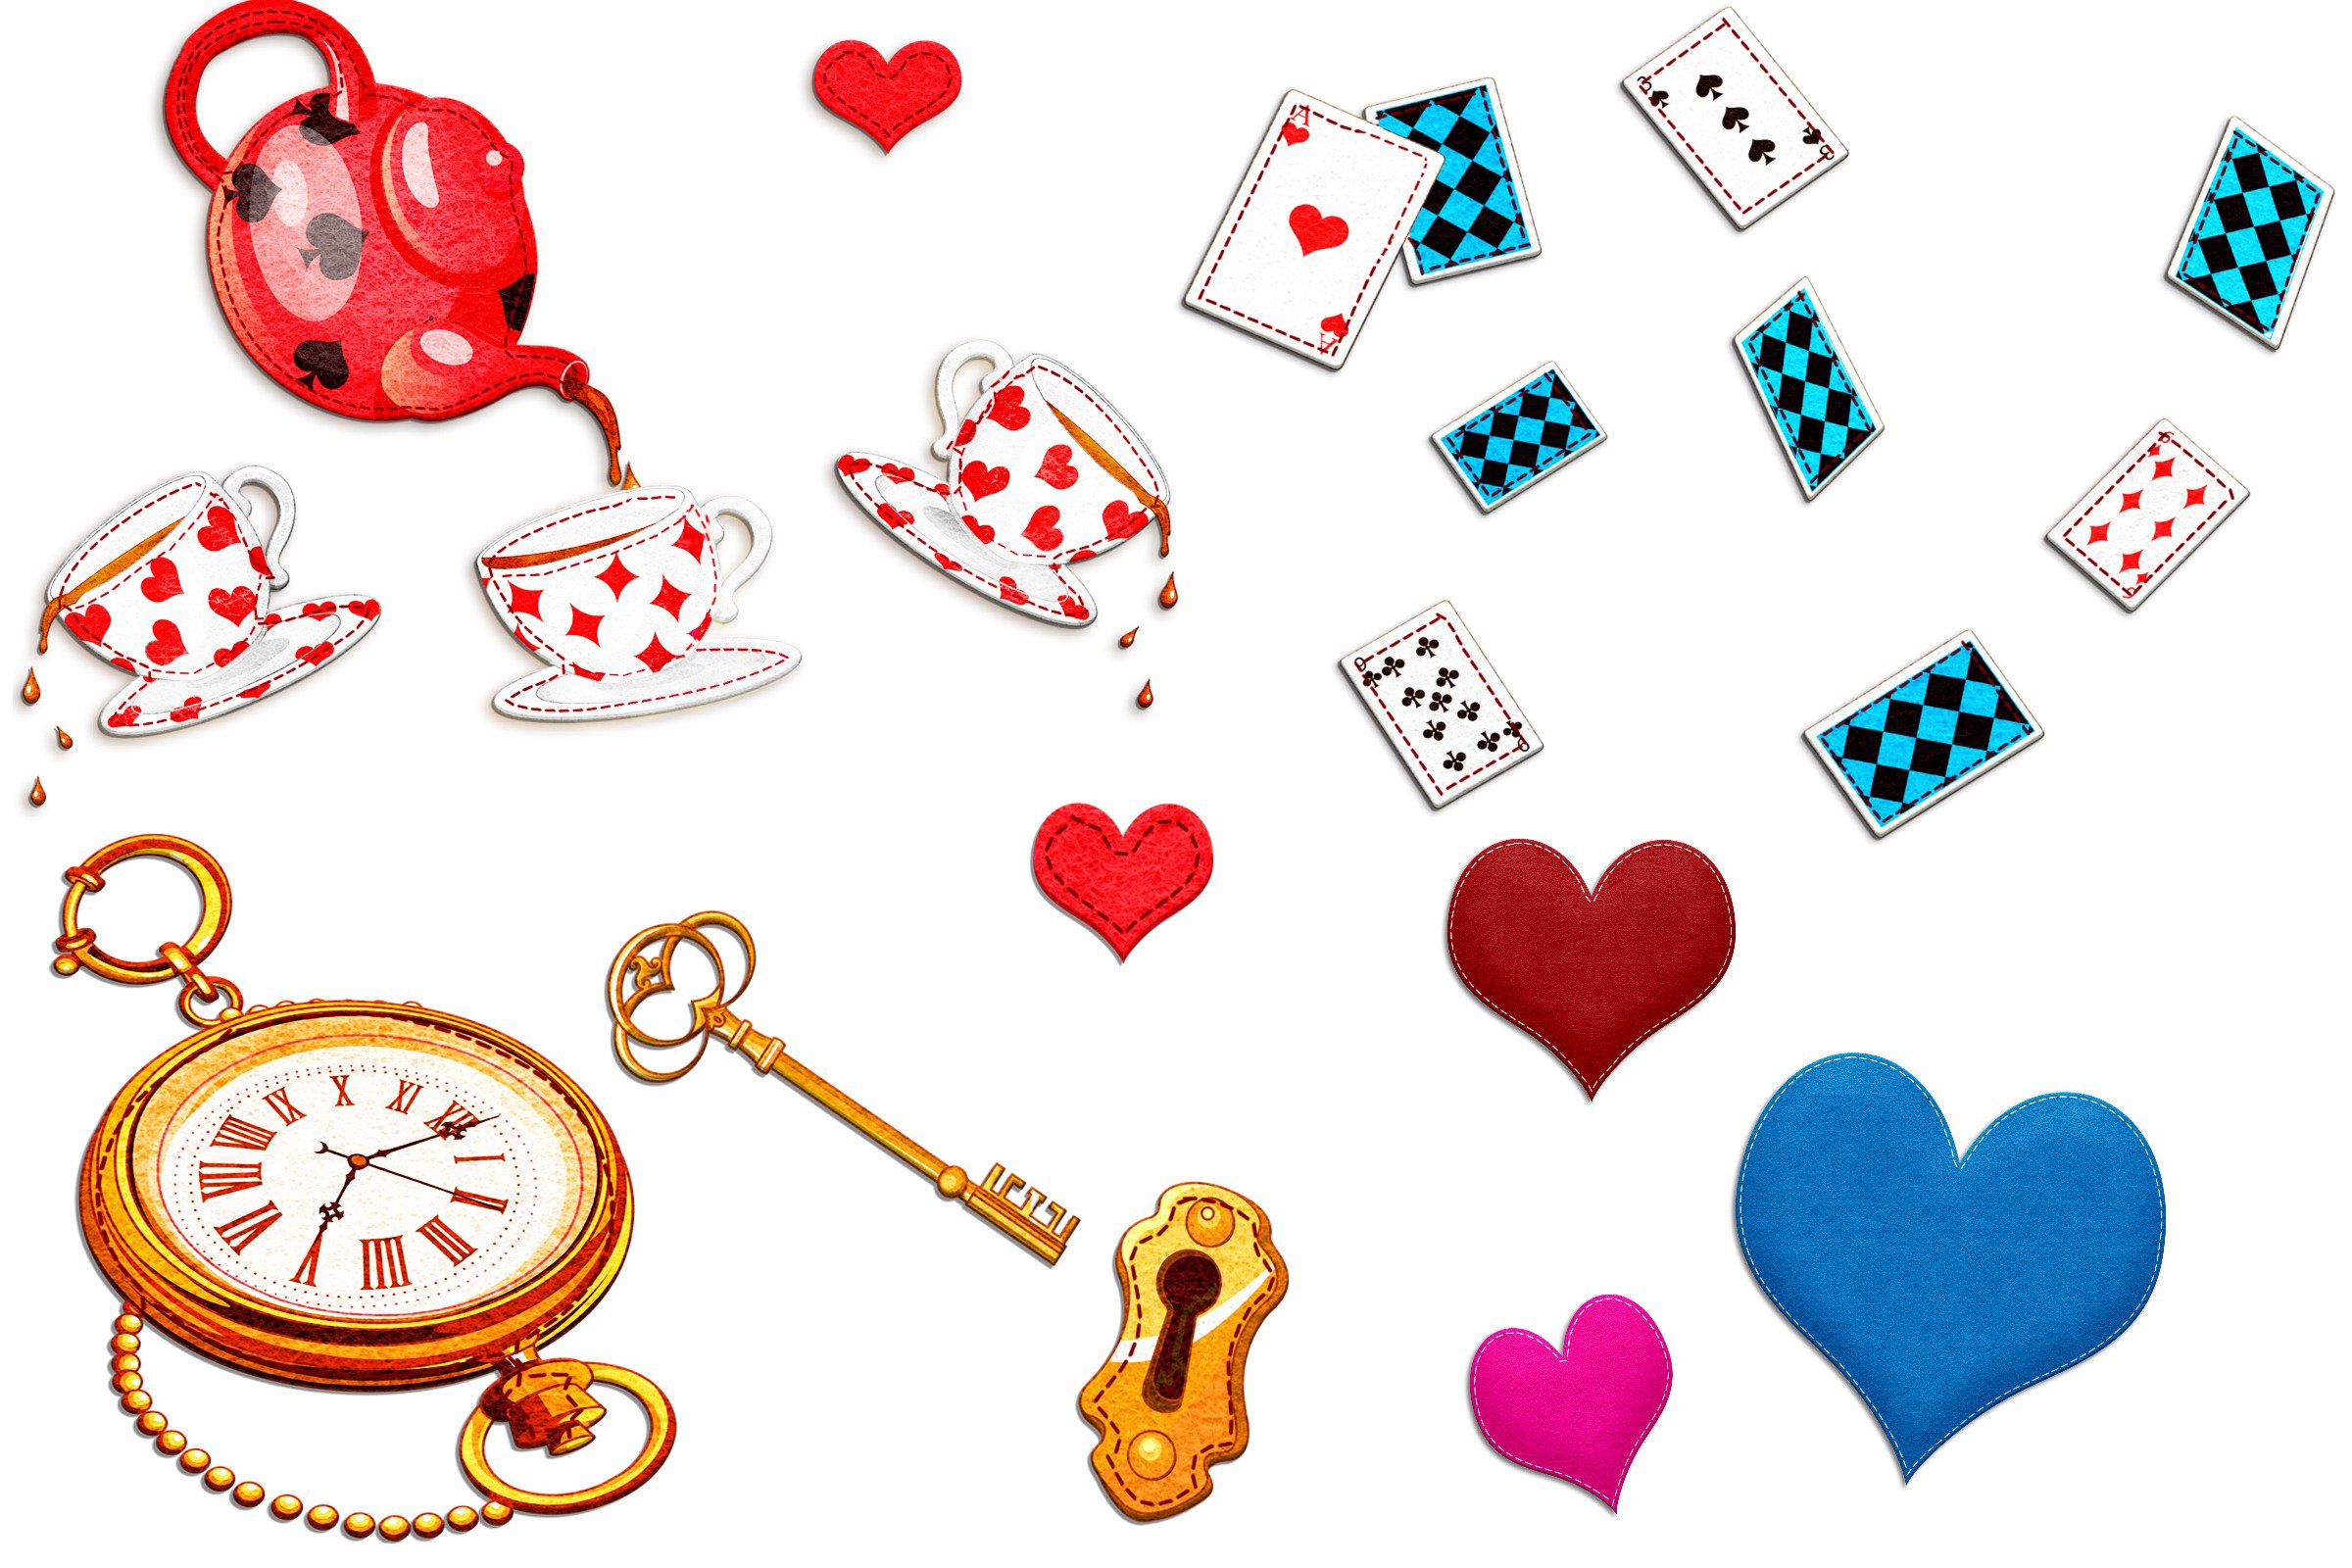 Cup, hearts, key and lock, compass and others.